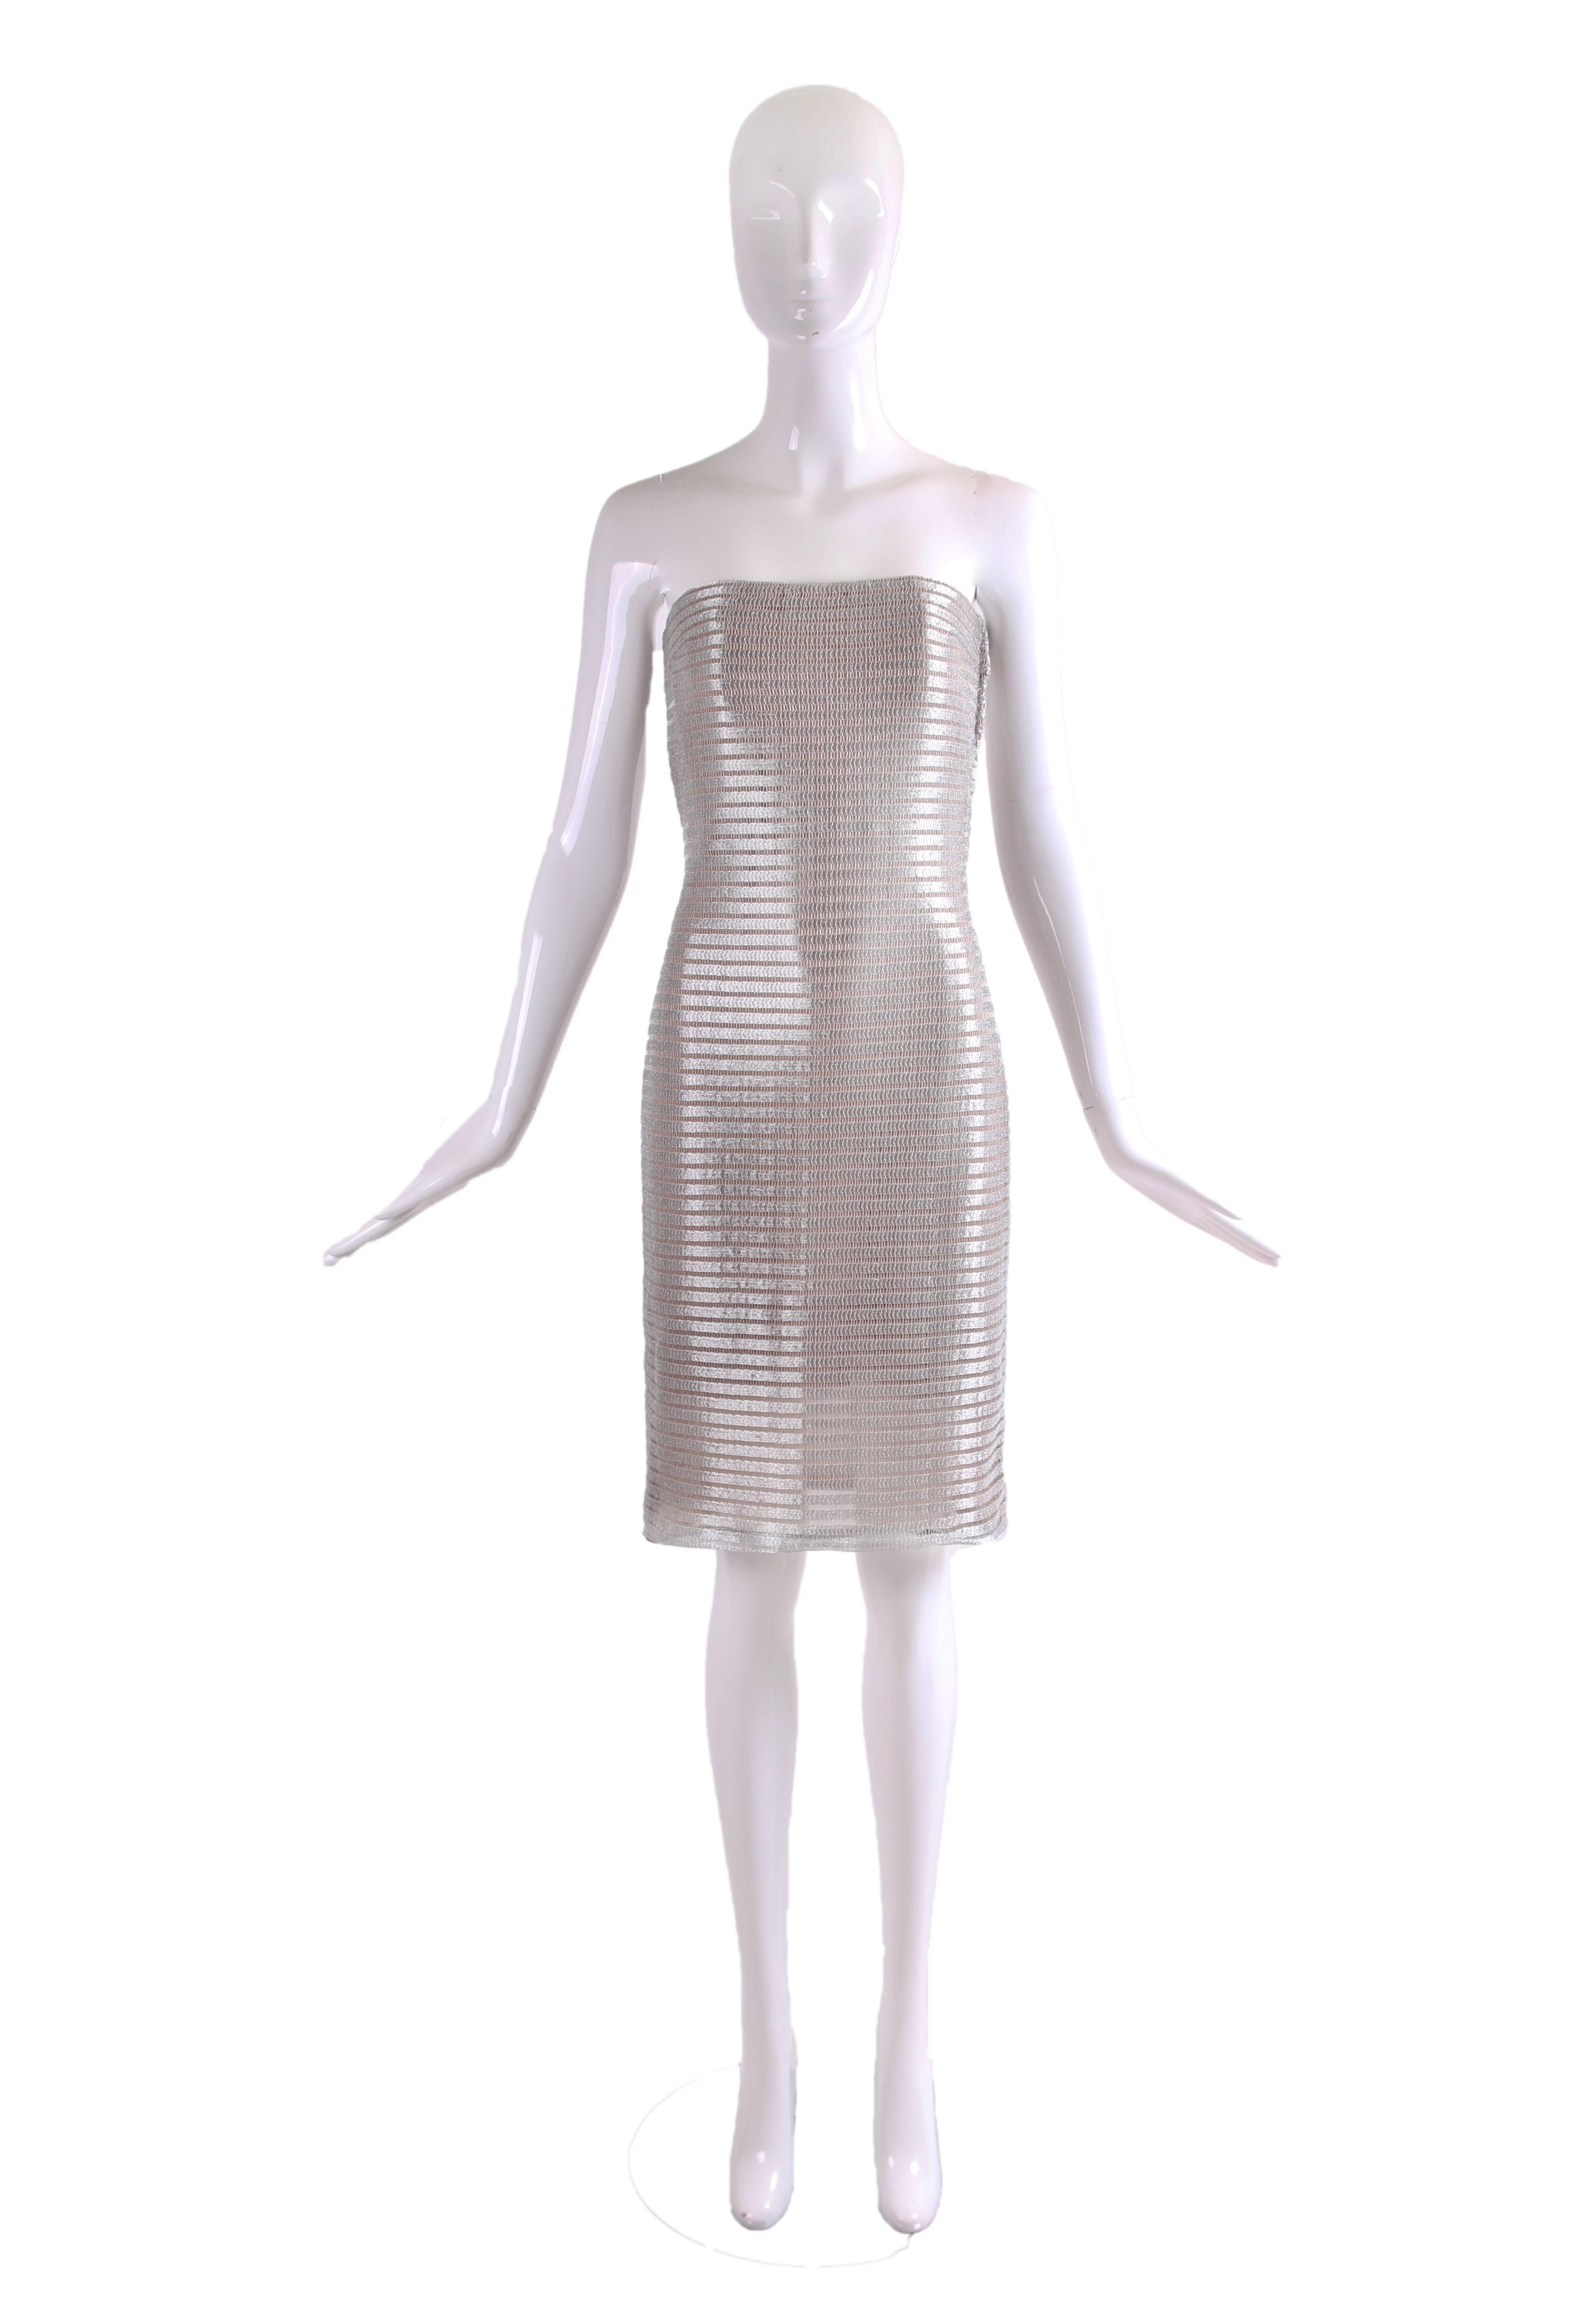 1990's Calvin Klein collection silver mesh strapless cocktail dress lined with nude colored silk. In excellent condition - no size tag please consult measurements.
MEASUREMENTS:
Bust - 34"
Waist - 26"
Hips - 36"
Length - 32.5"